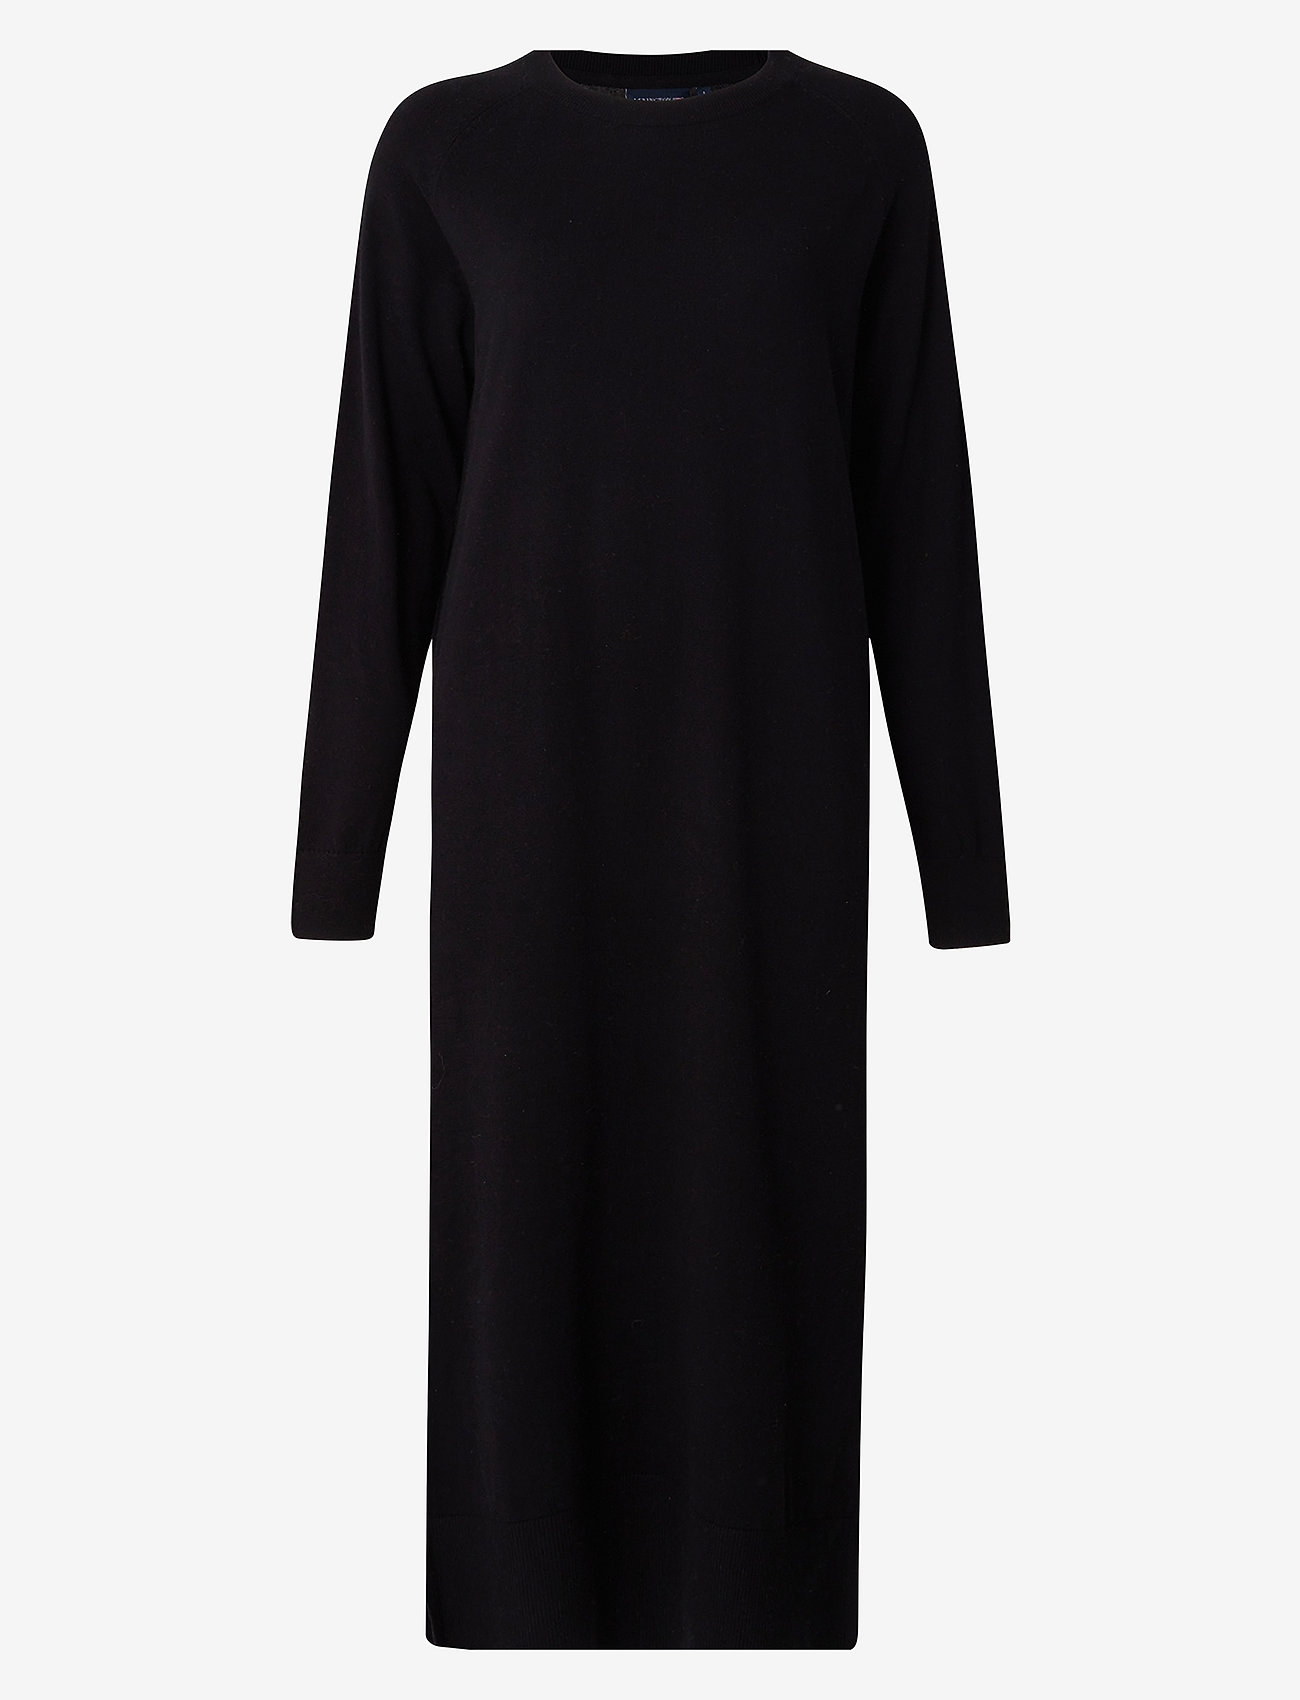 Lexington Clothing - Ivana Cotton/Cashmere Knitted Dress - knitted dresses - black - 0